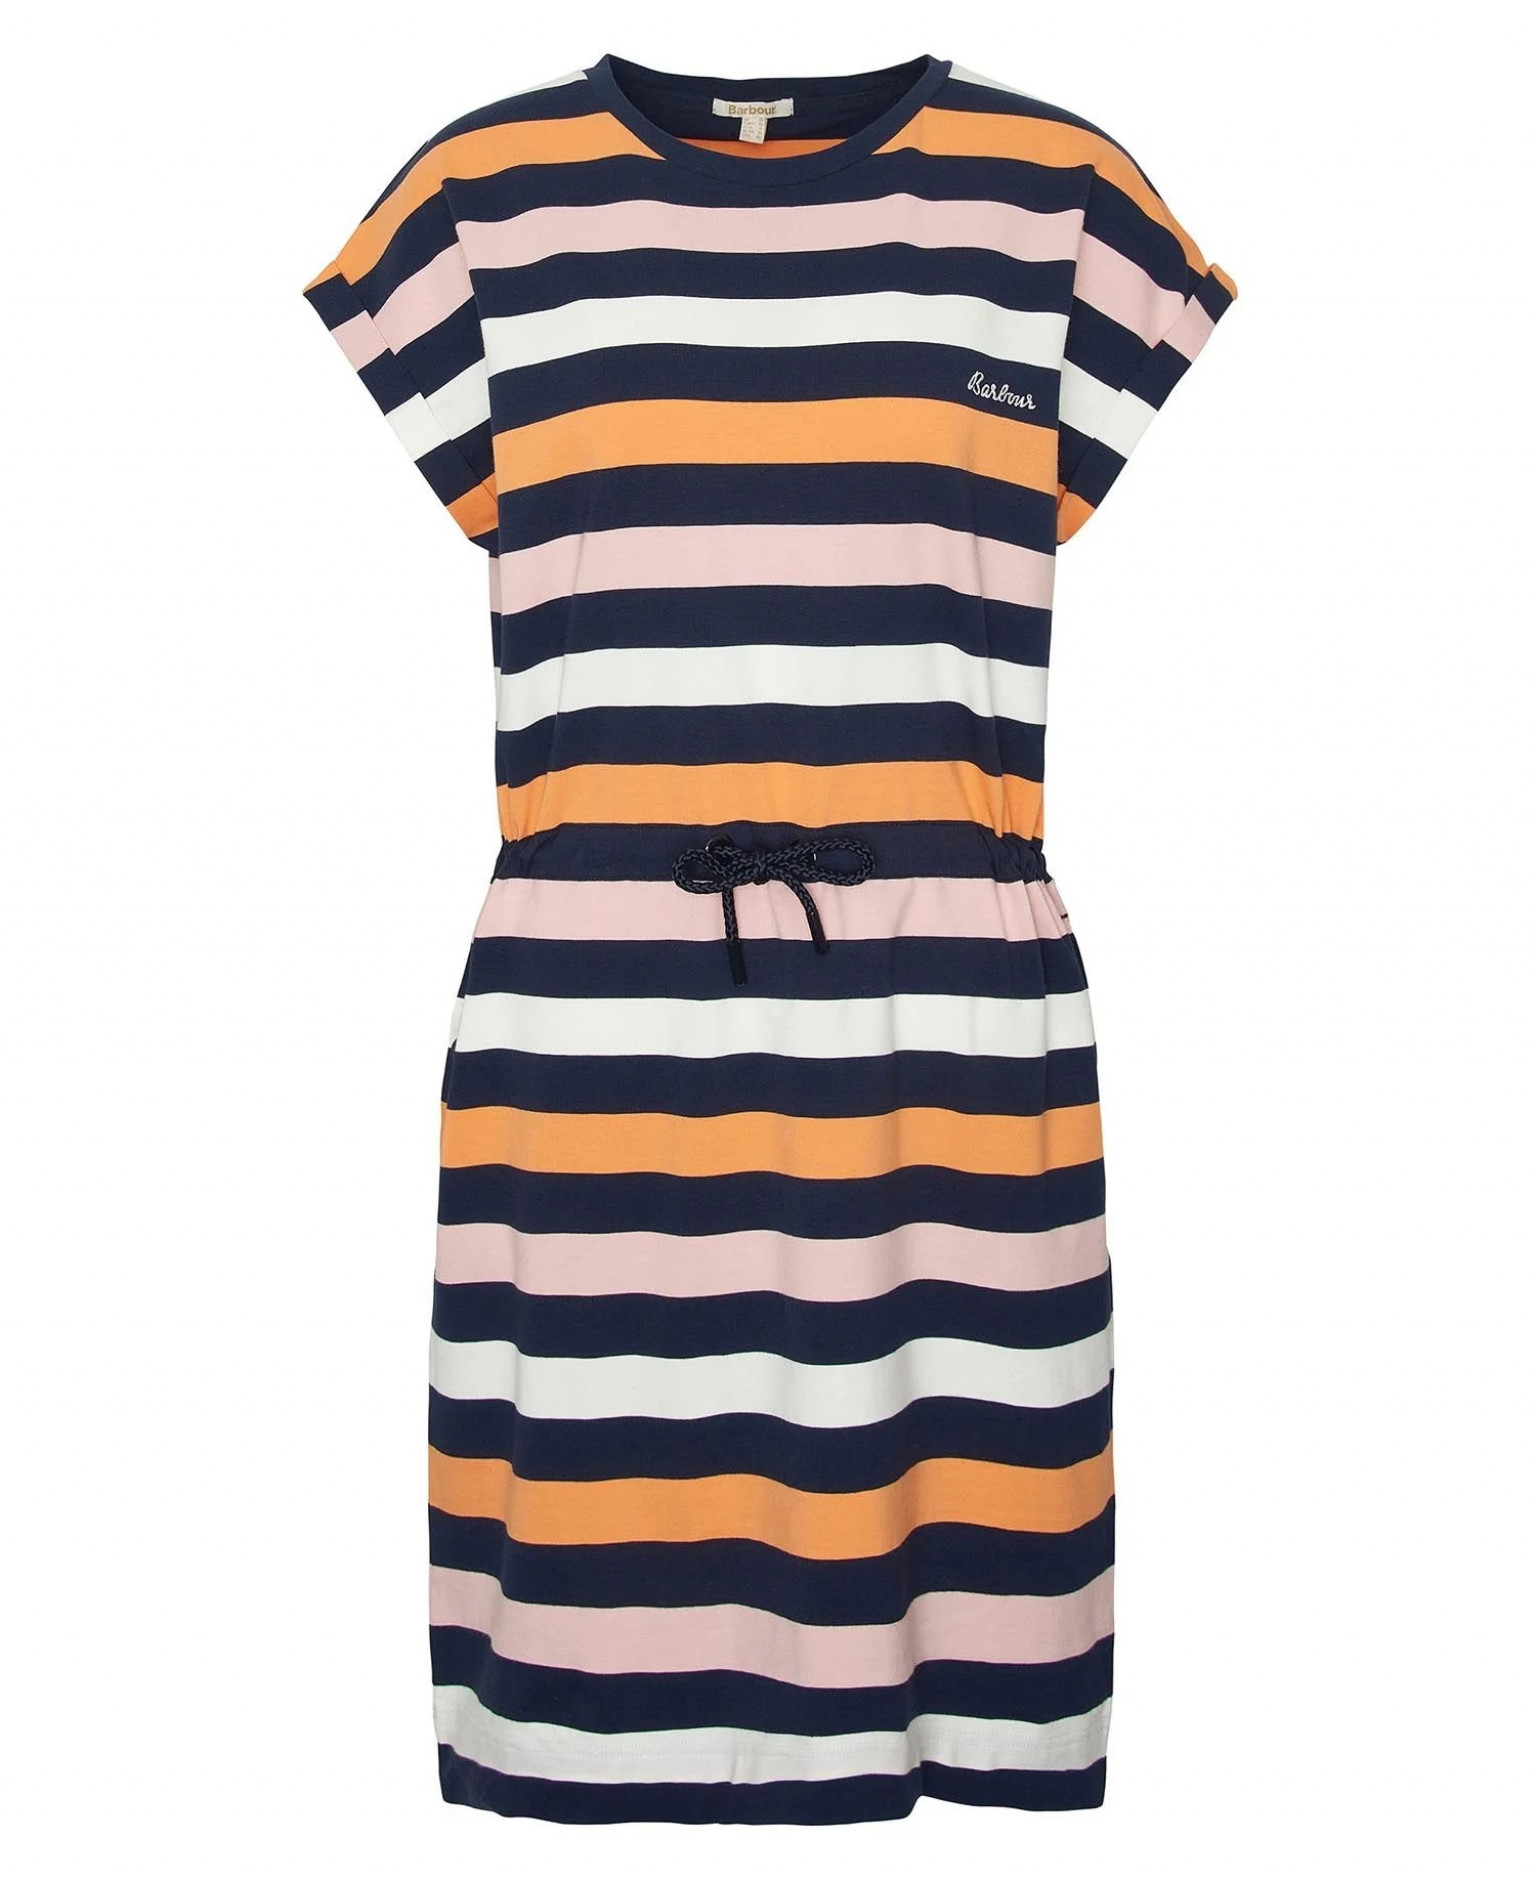 Barbour Marloes Stripe Dress Navy Apricot